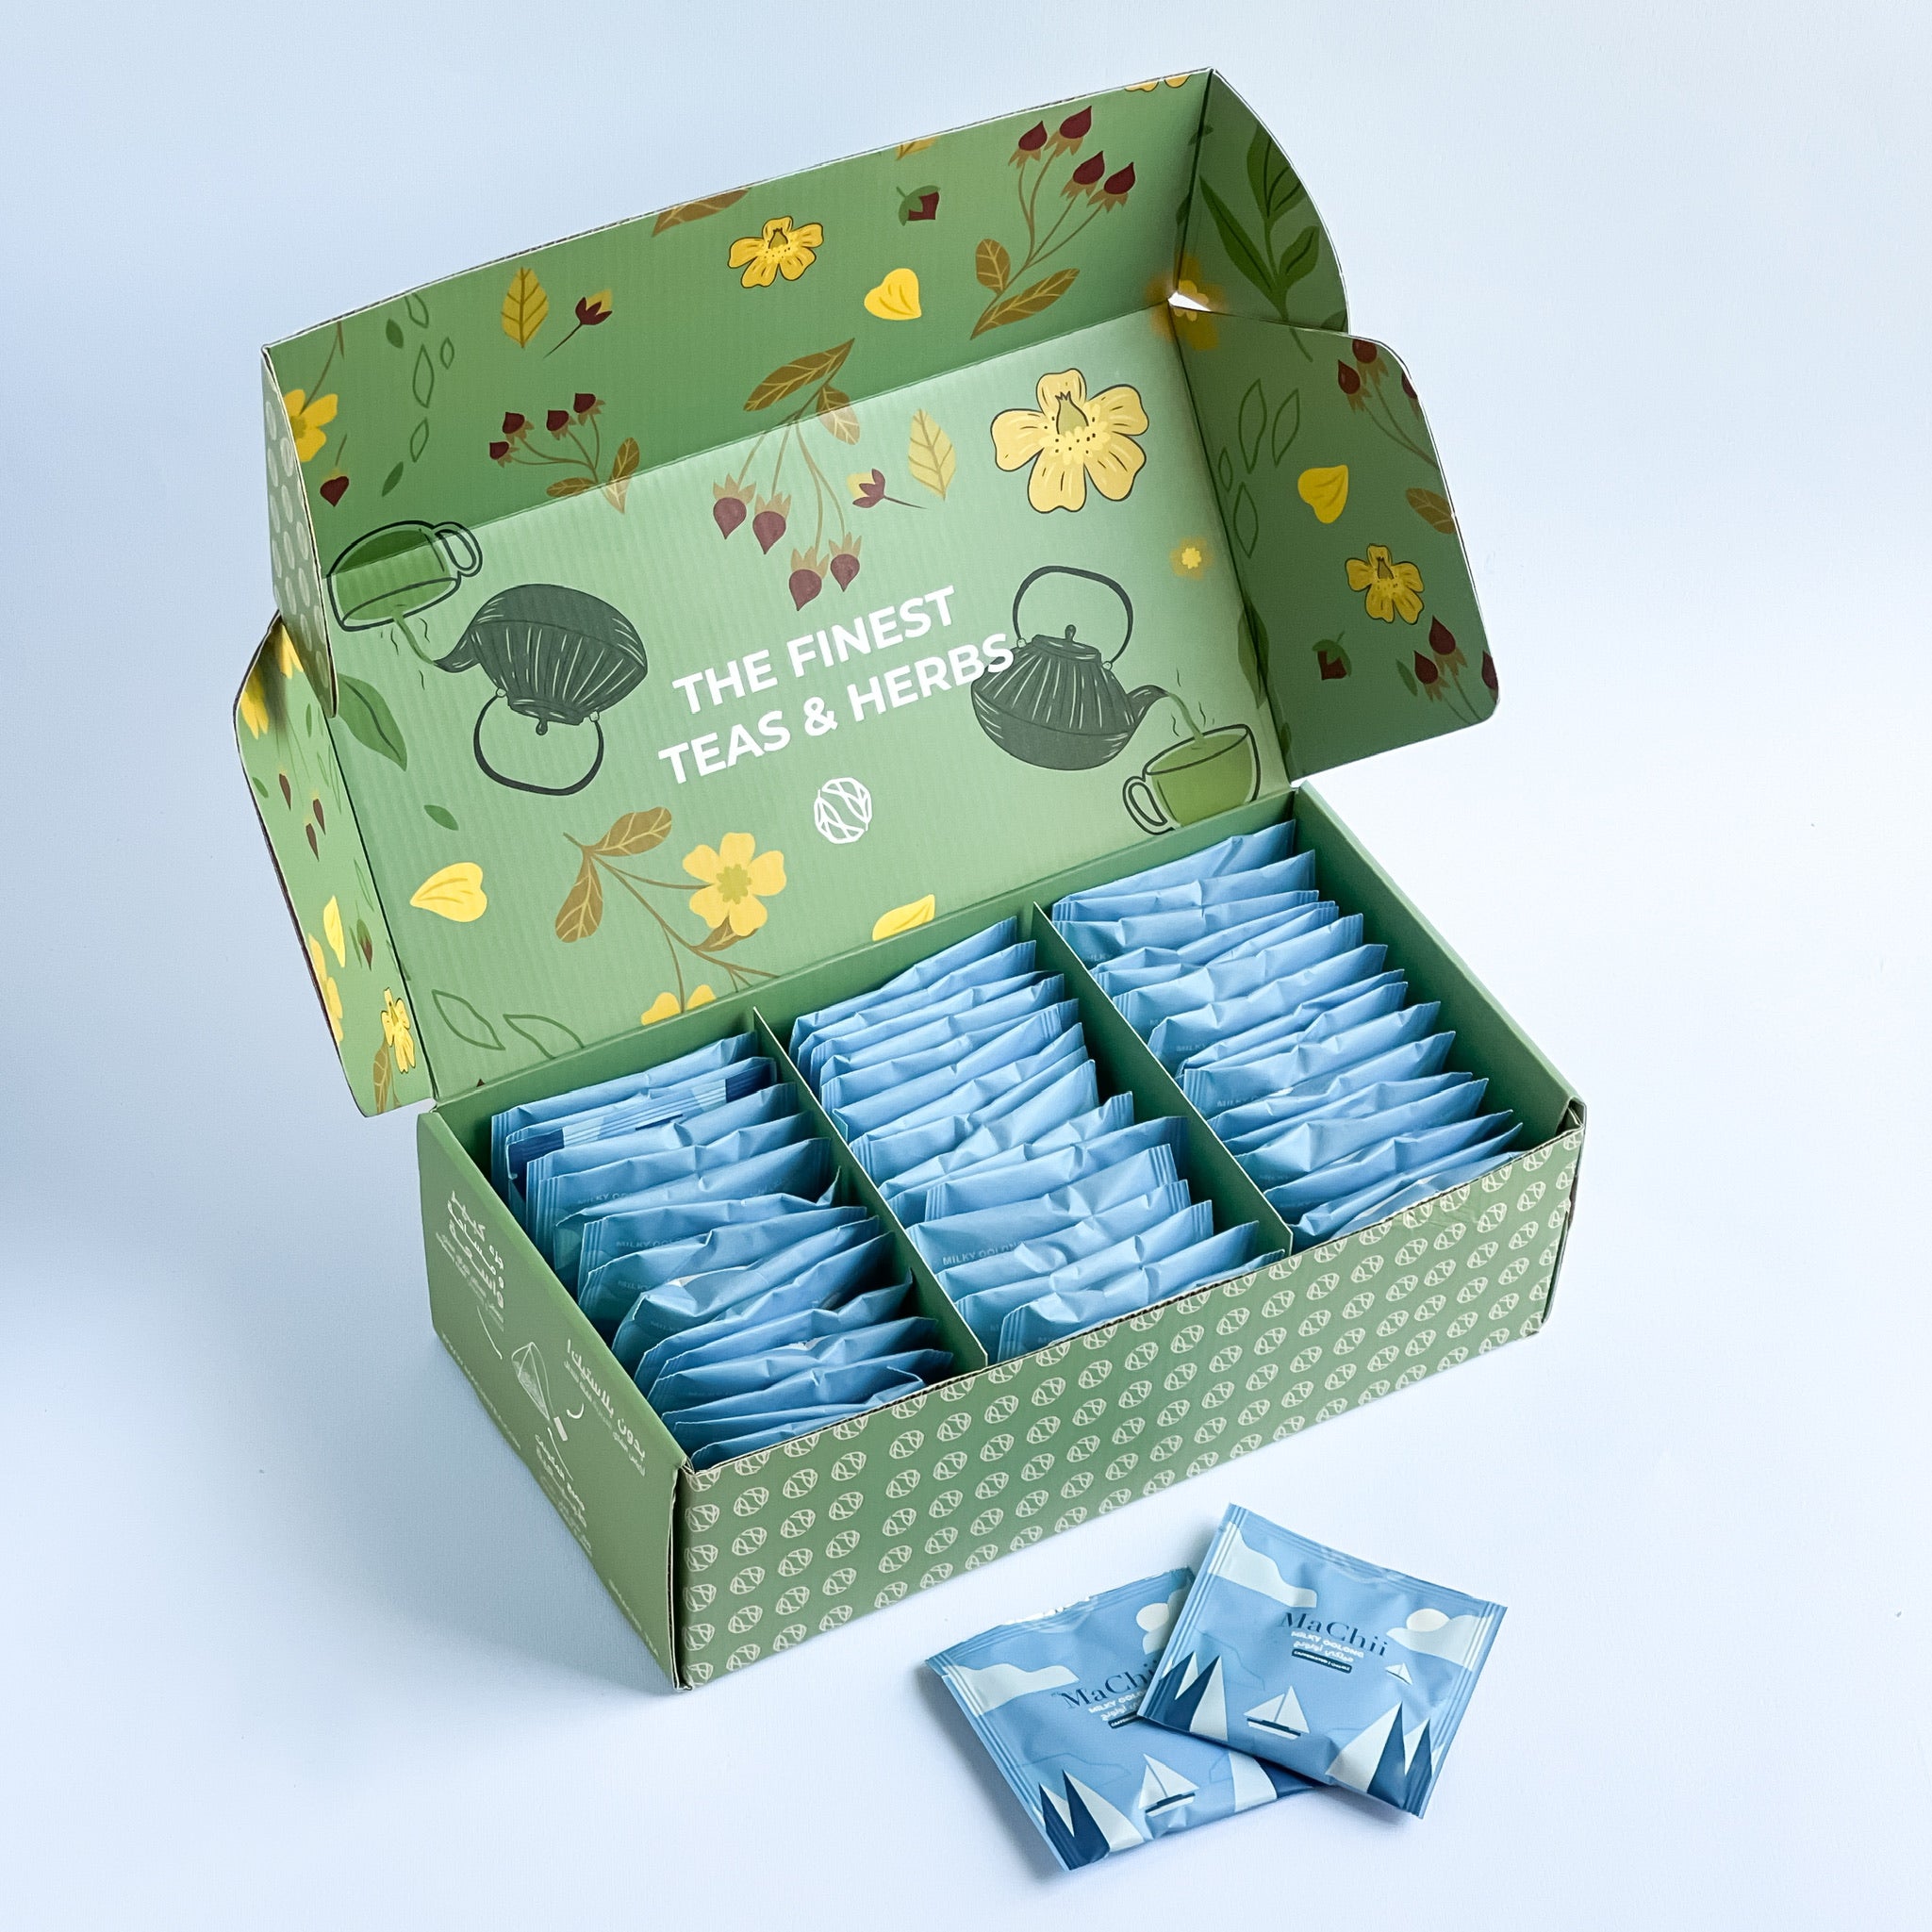 milky oolong tea in a wholesale MaChii Tea box. the box has 50 individually wrapped enveloped tea bags in rows of 3